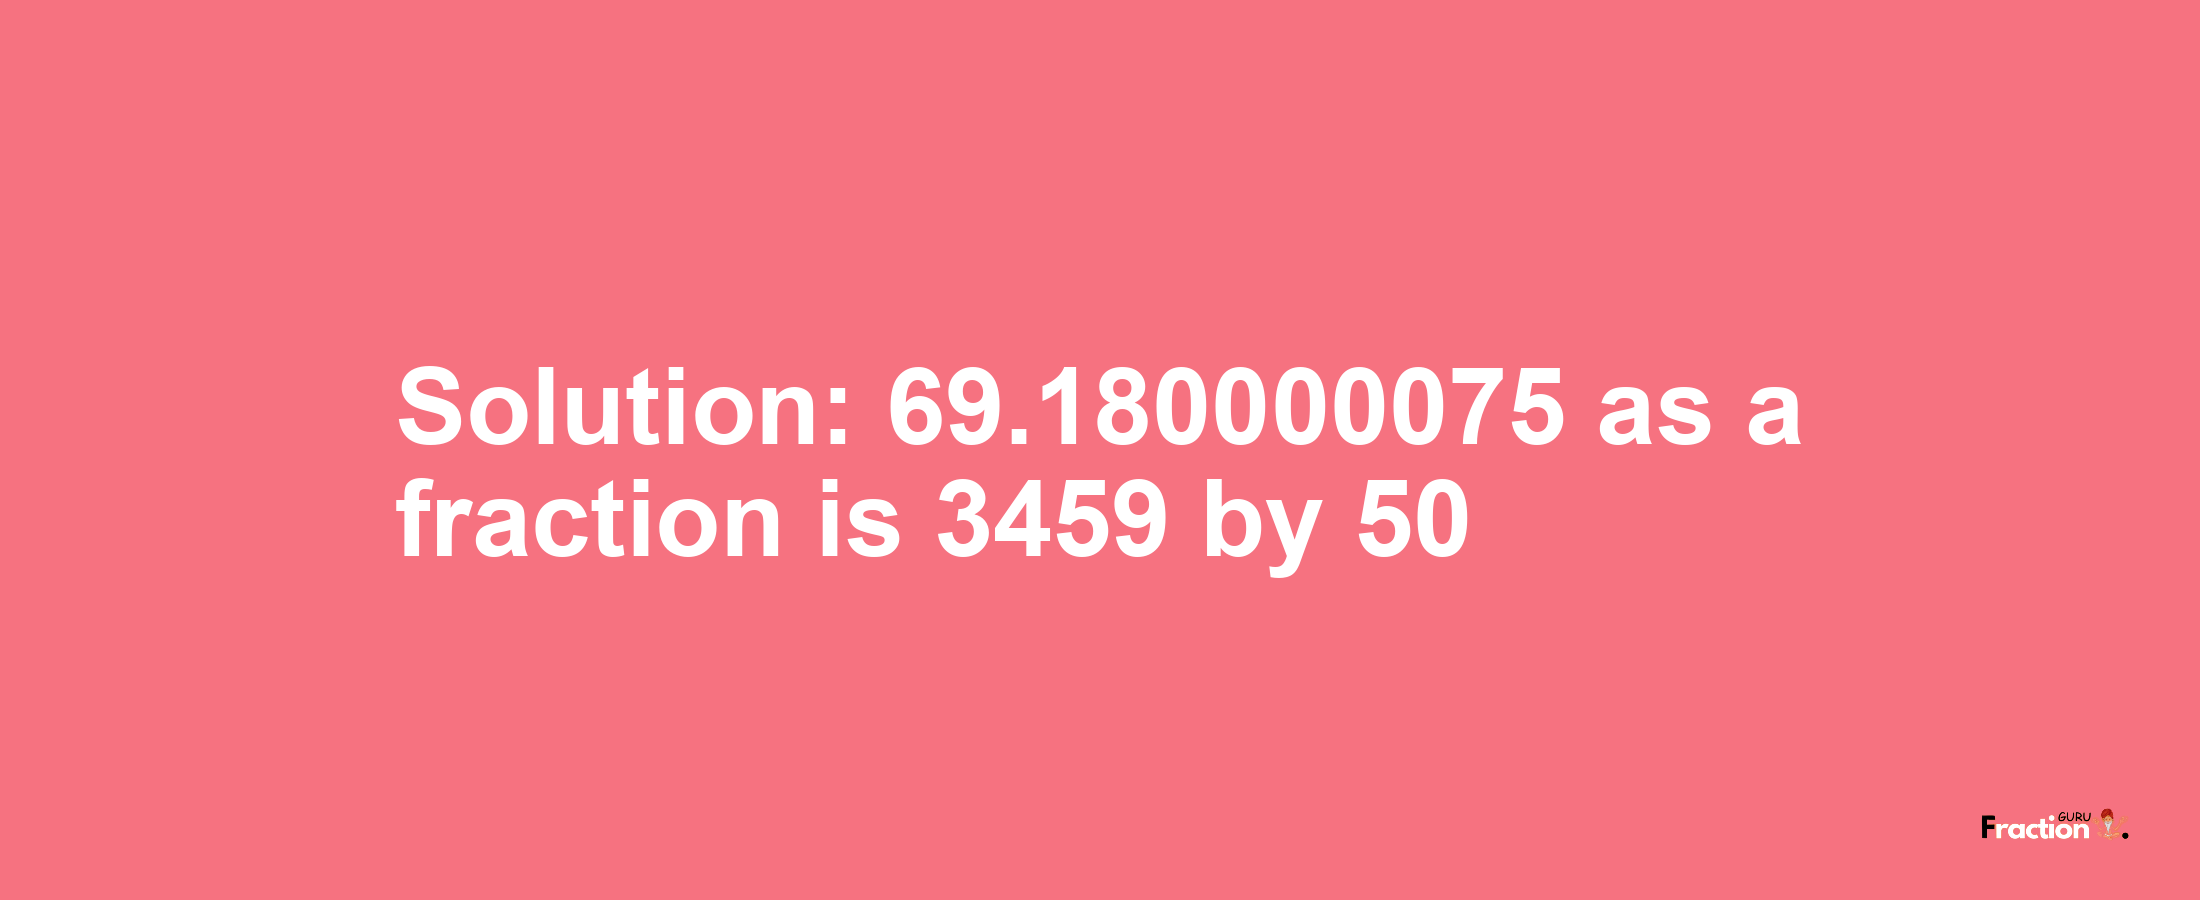 Solution:69.180000075 as a fraction is 3459/50